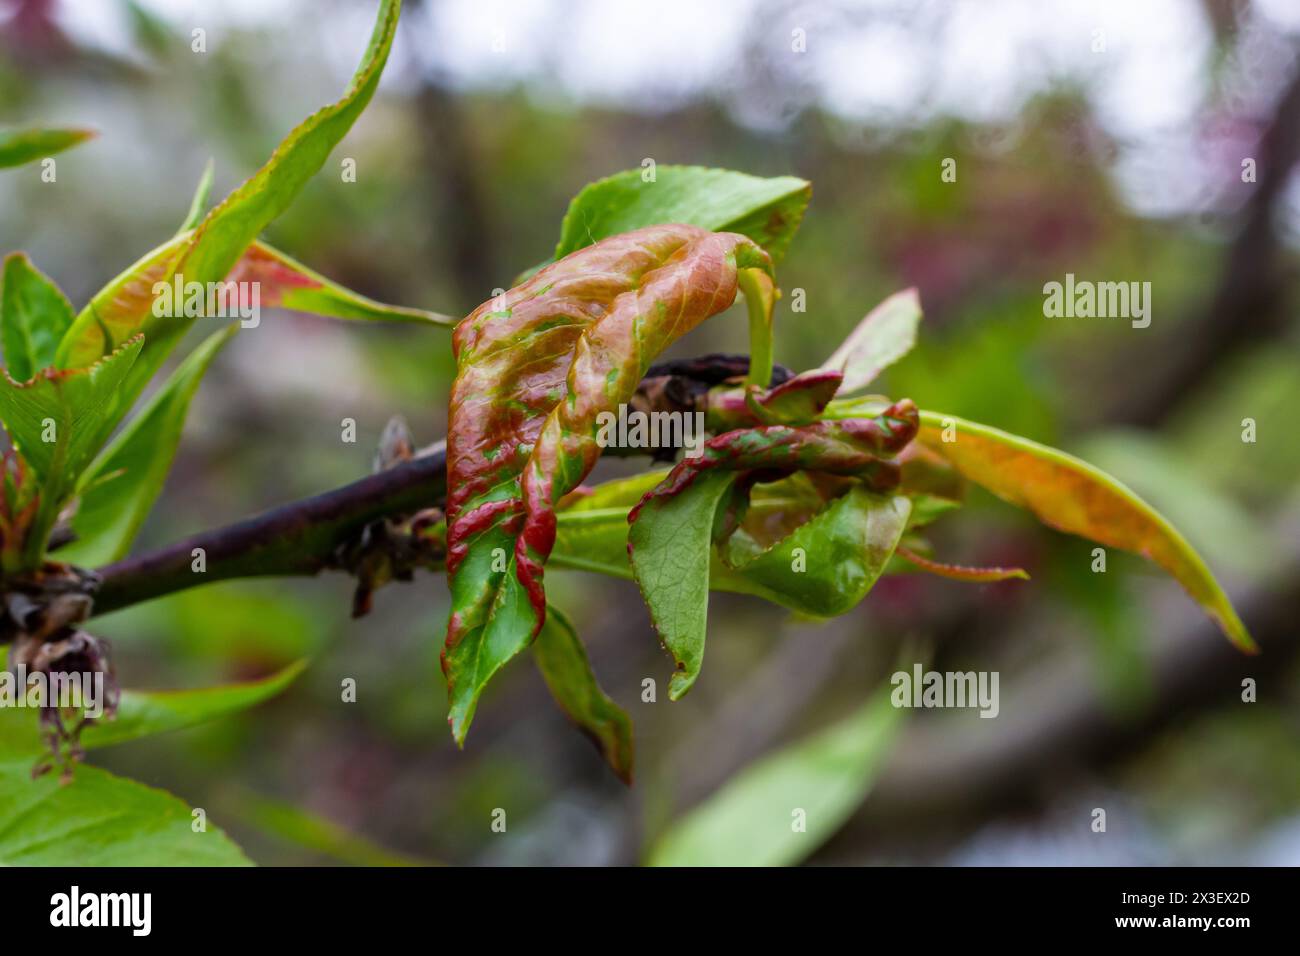 Peach leaf curl. Fungal disease of peaches tree. Taphrina deformans. Peach tree fungus disease. Selective focus. Topic - diseases and pests of fruit t Stock Photo